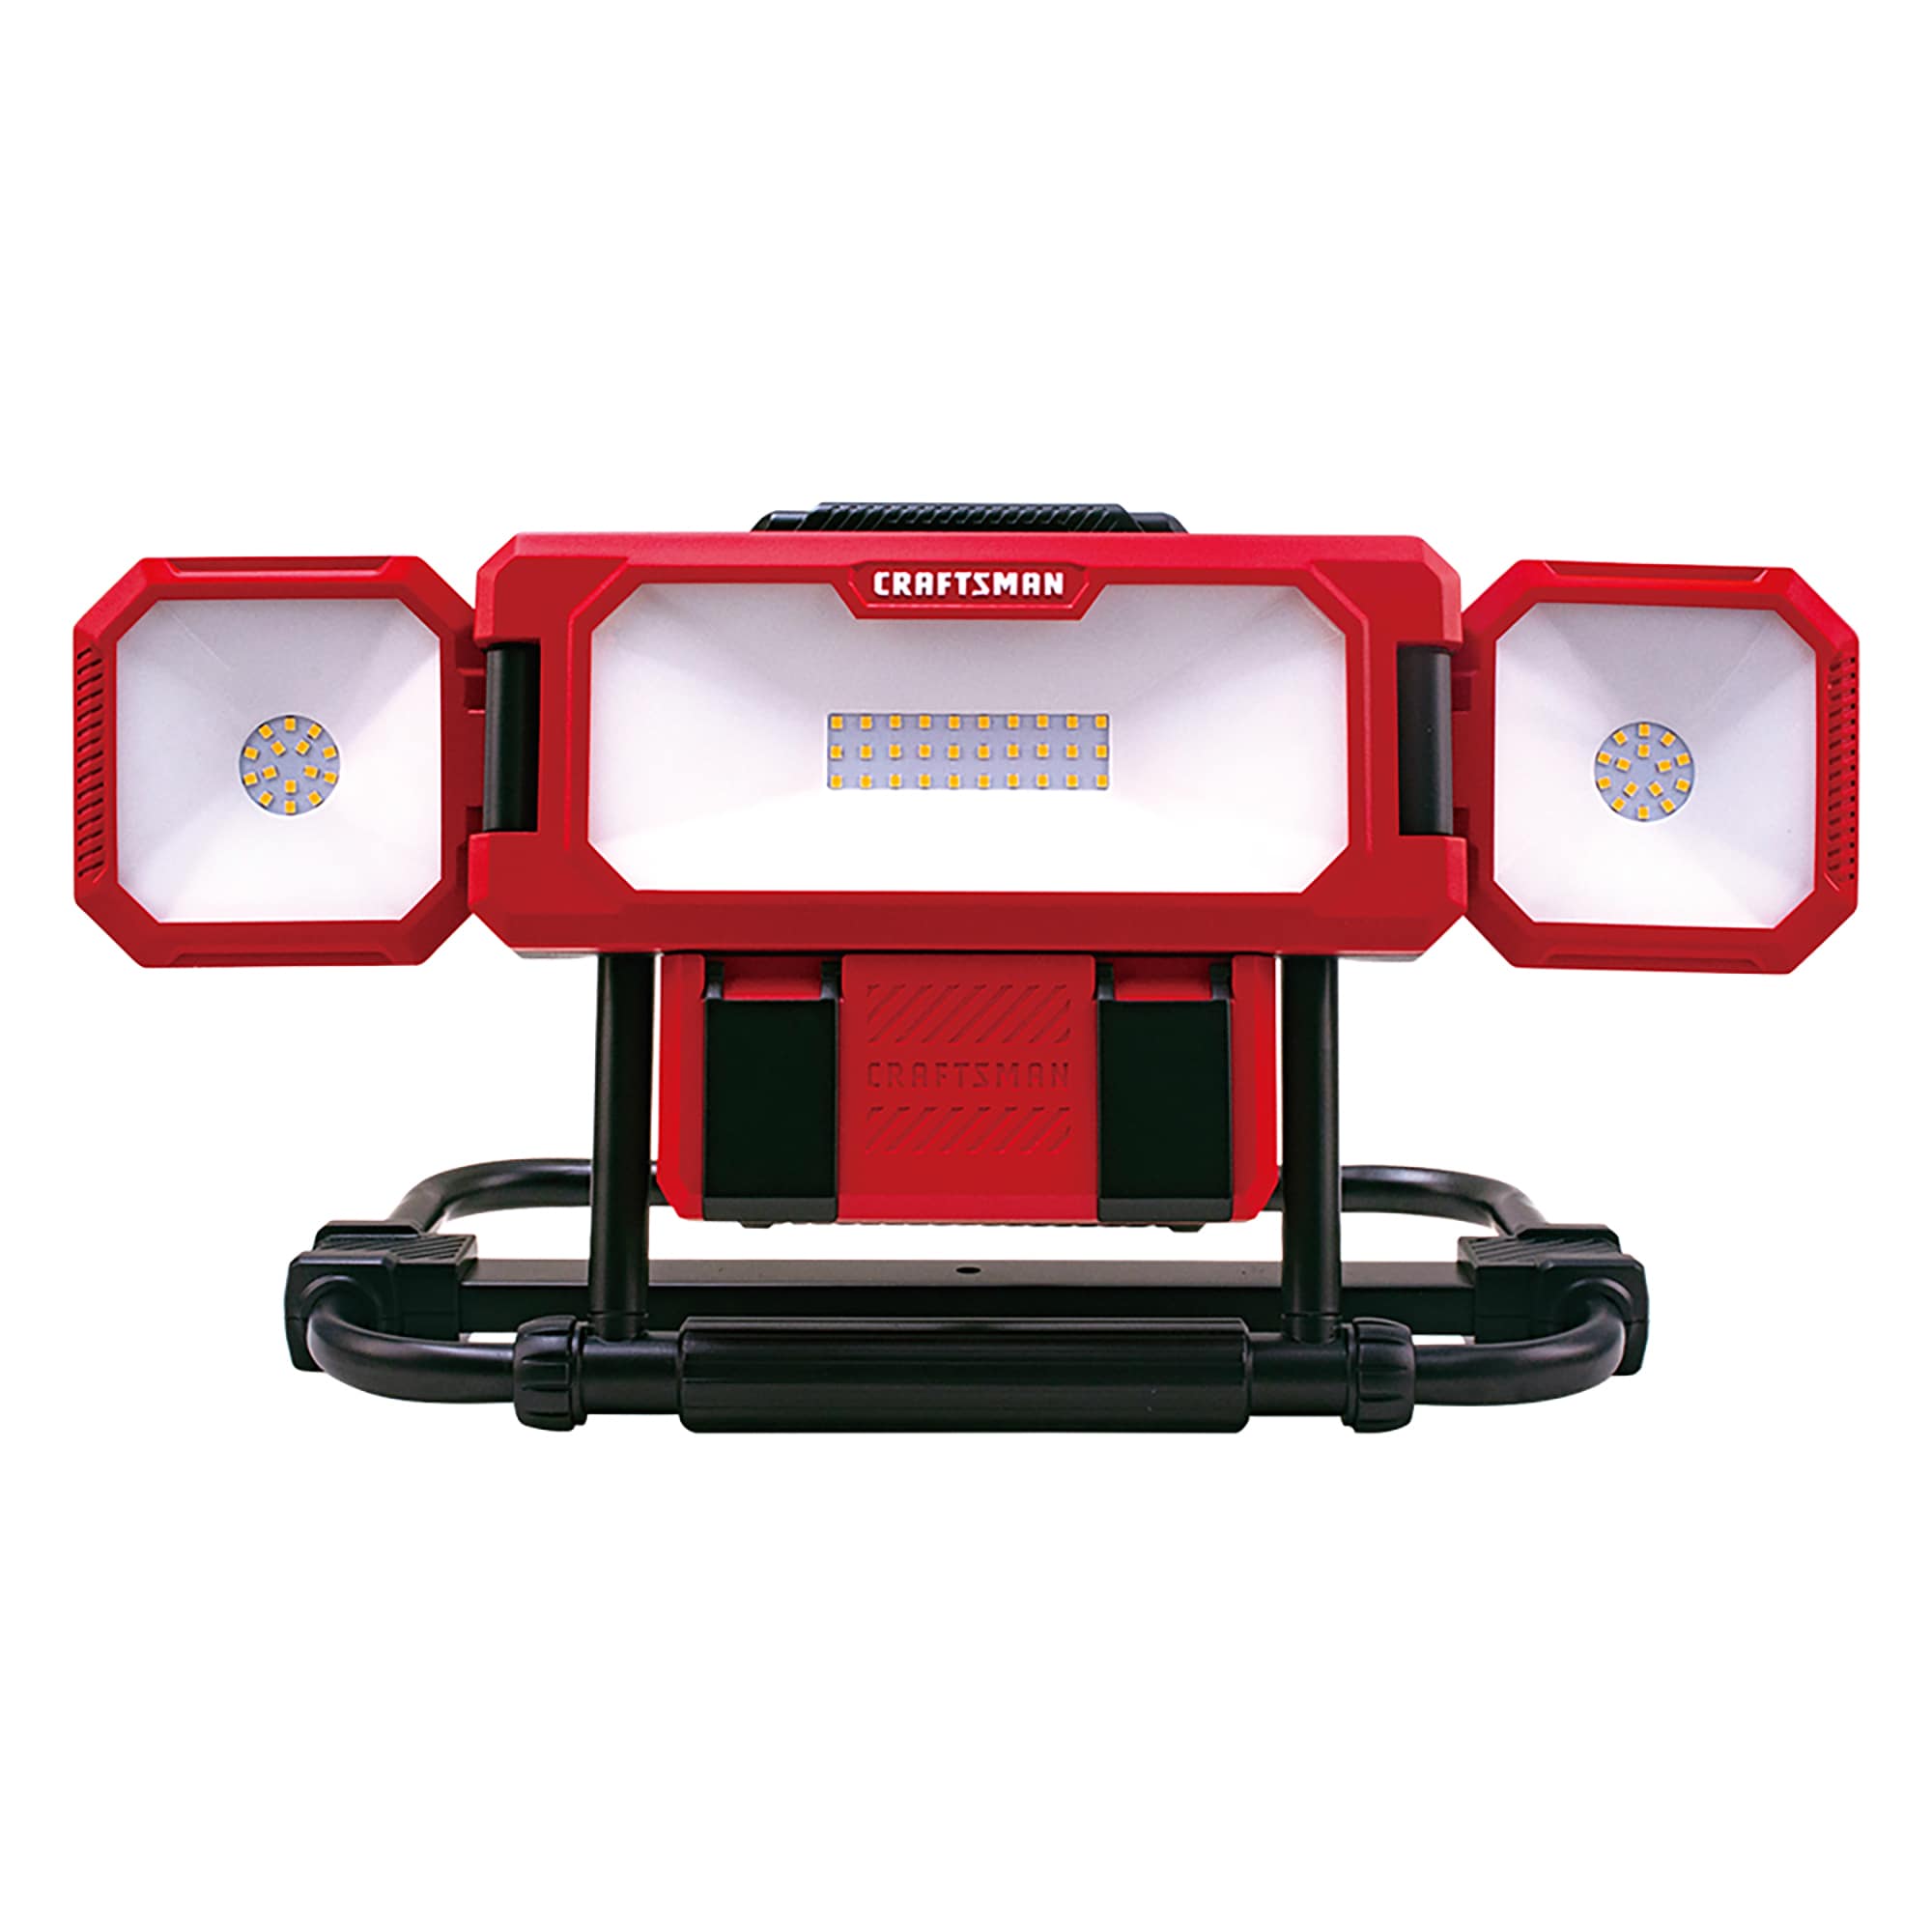 CRAFTSMAN 3000-Lumen LED Red Plug-in Portable Work Light in the